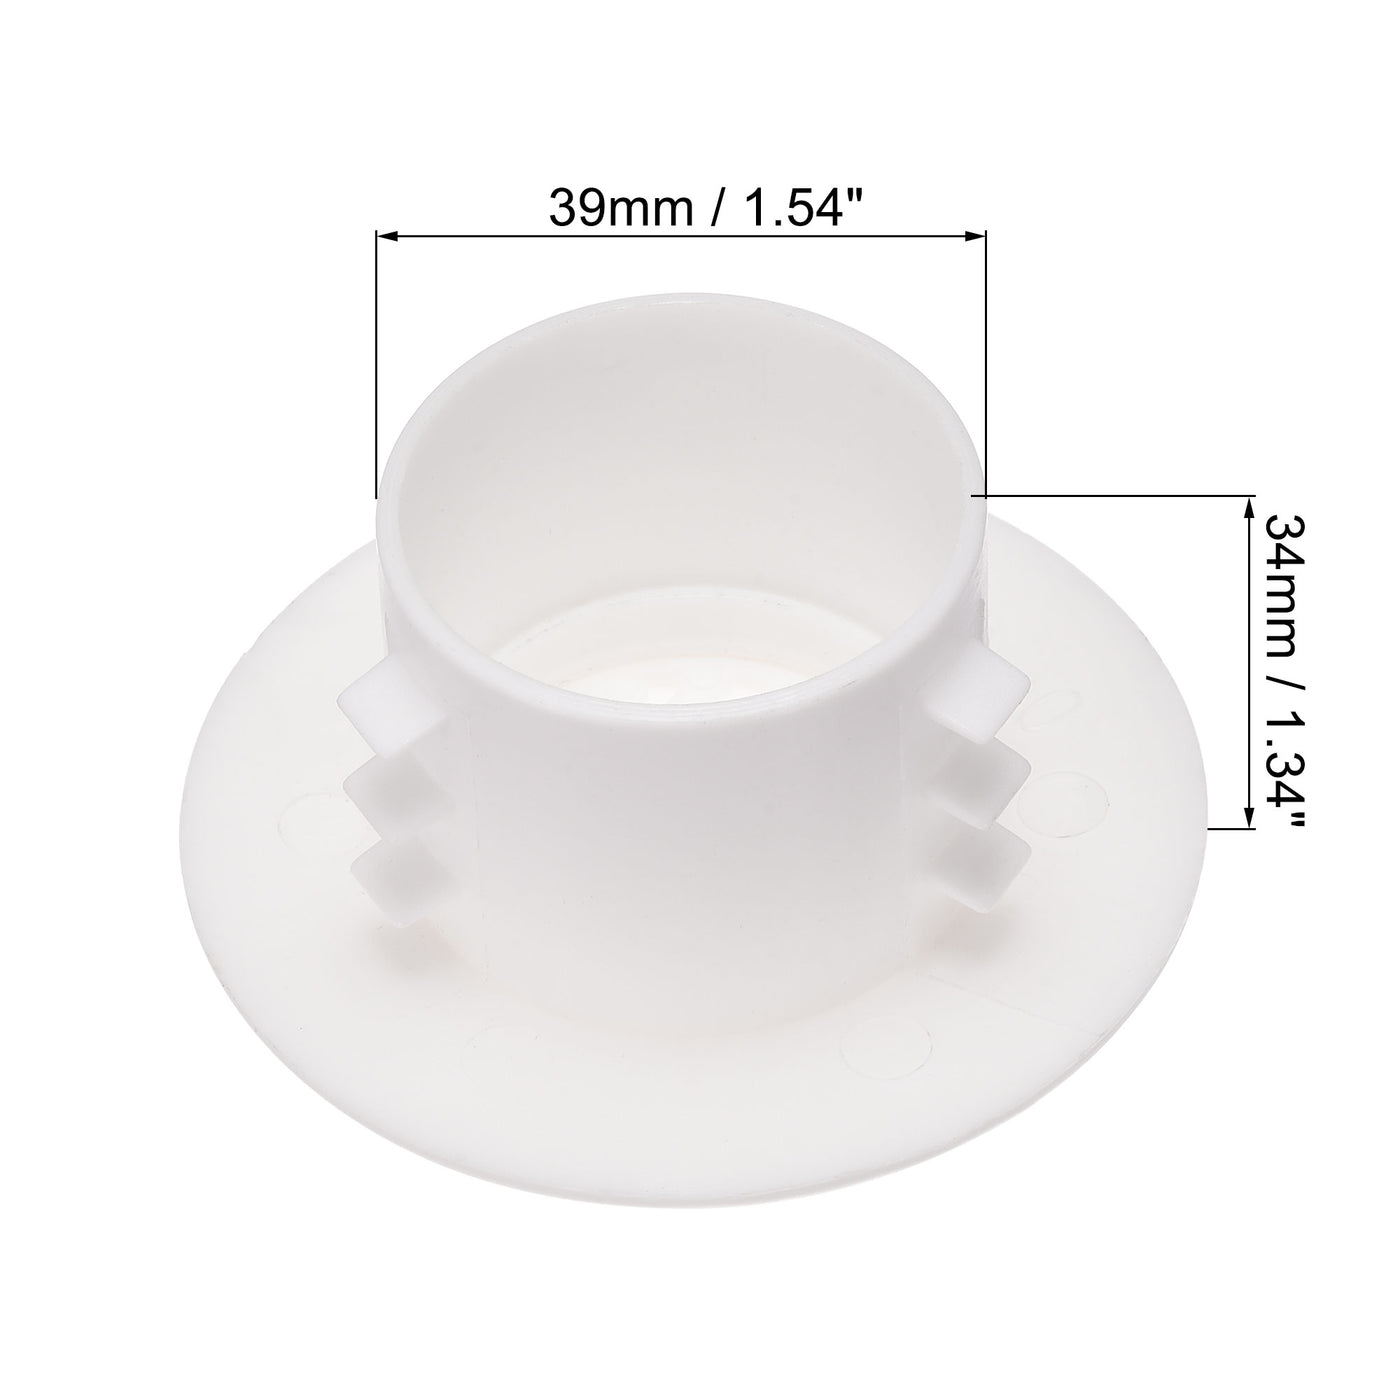 Uxcell Uxcell Round Vent Cover, ABS Plastic Adjustable Air Vent Cover White for 4" - 4.3" Diameter Hole 4pcs